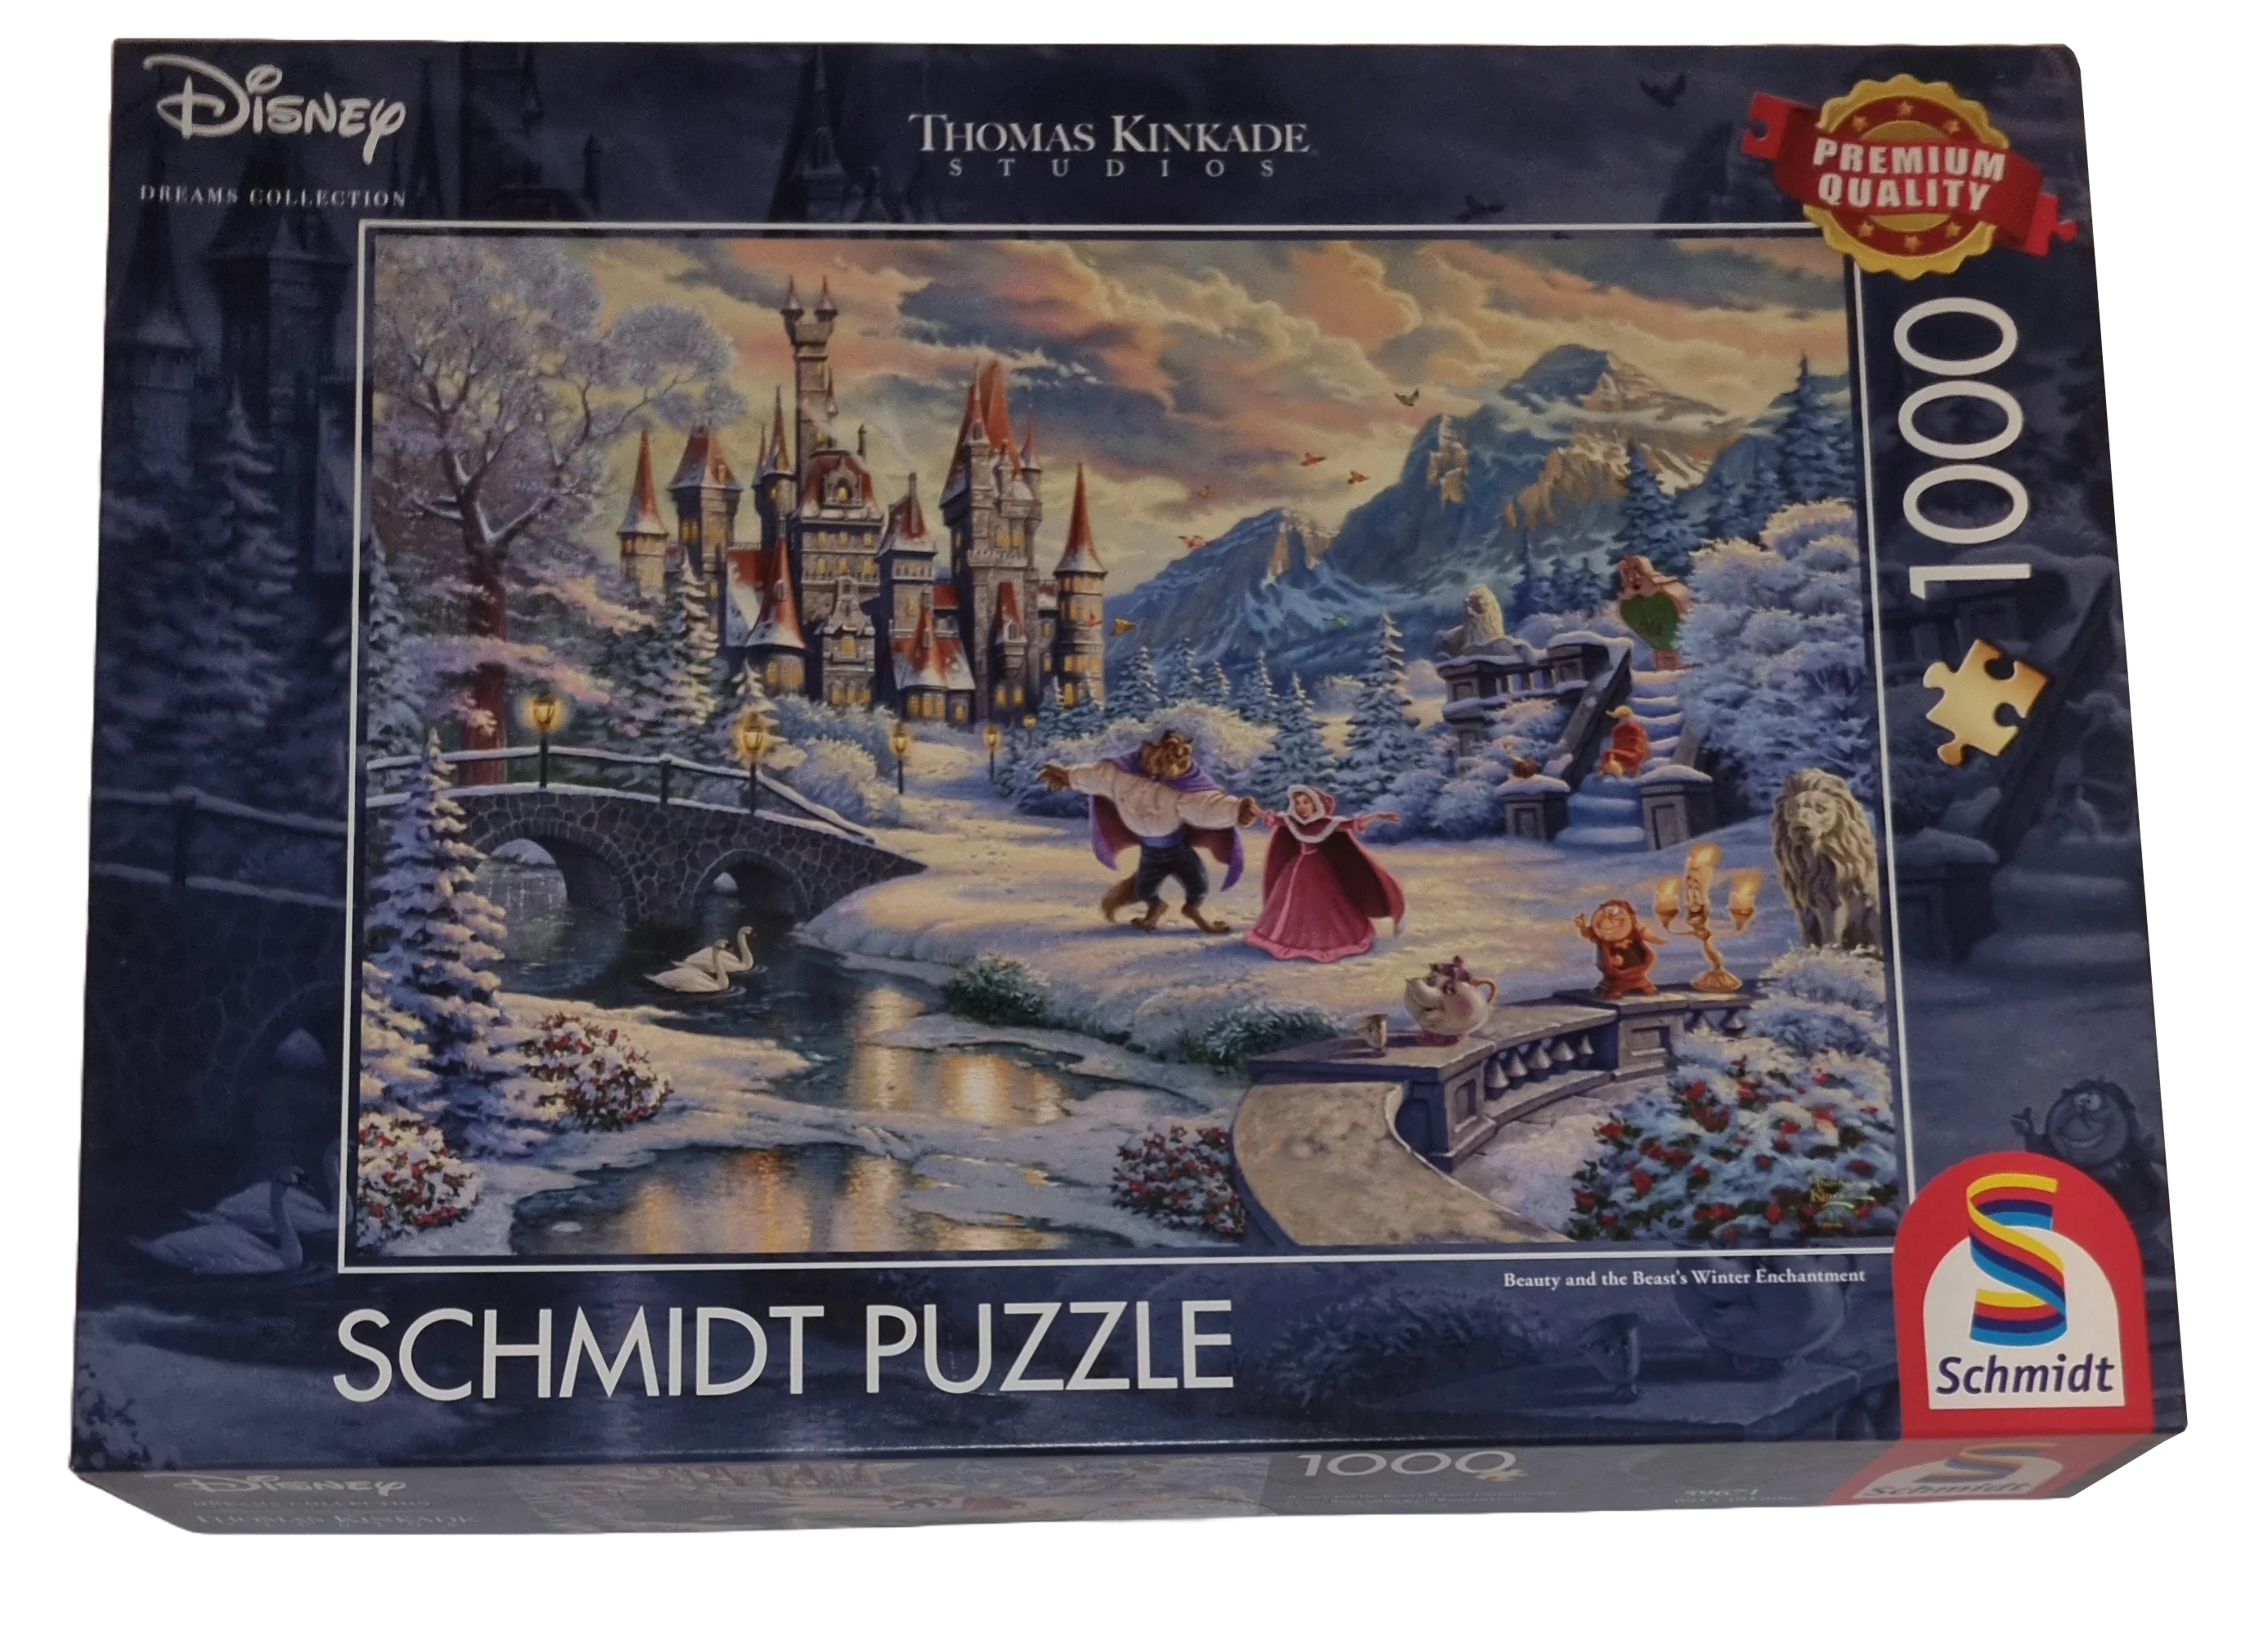 Schmidt Thomas Kinkade Puzzle 1000 Teile 59671 Beauty and the Beast's Winter Enchantment